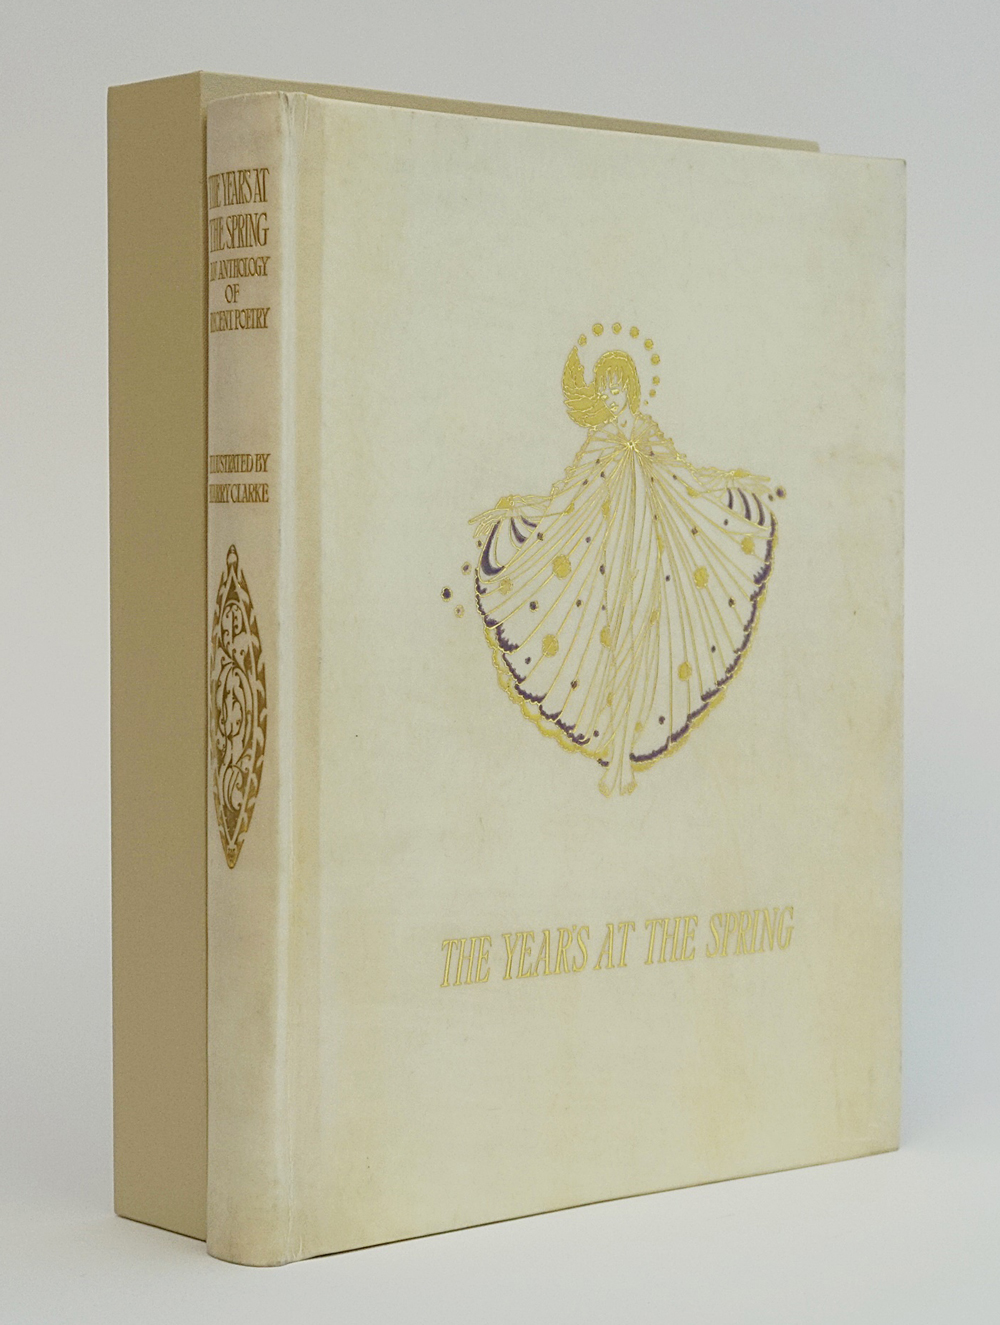 The Years at the Spring. An Anthology of Recent Poetry. London: George G. Harrap &amp; Co. Ltd., 1920.